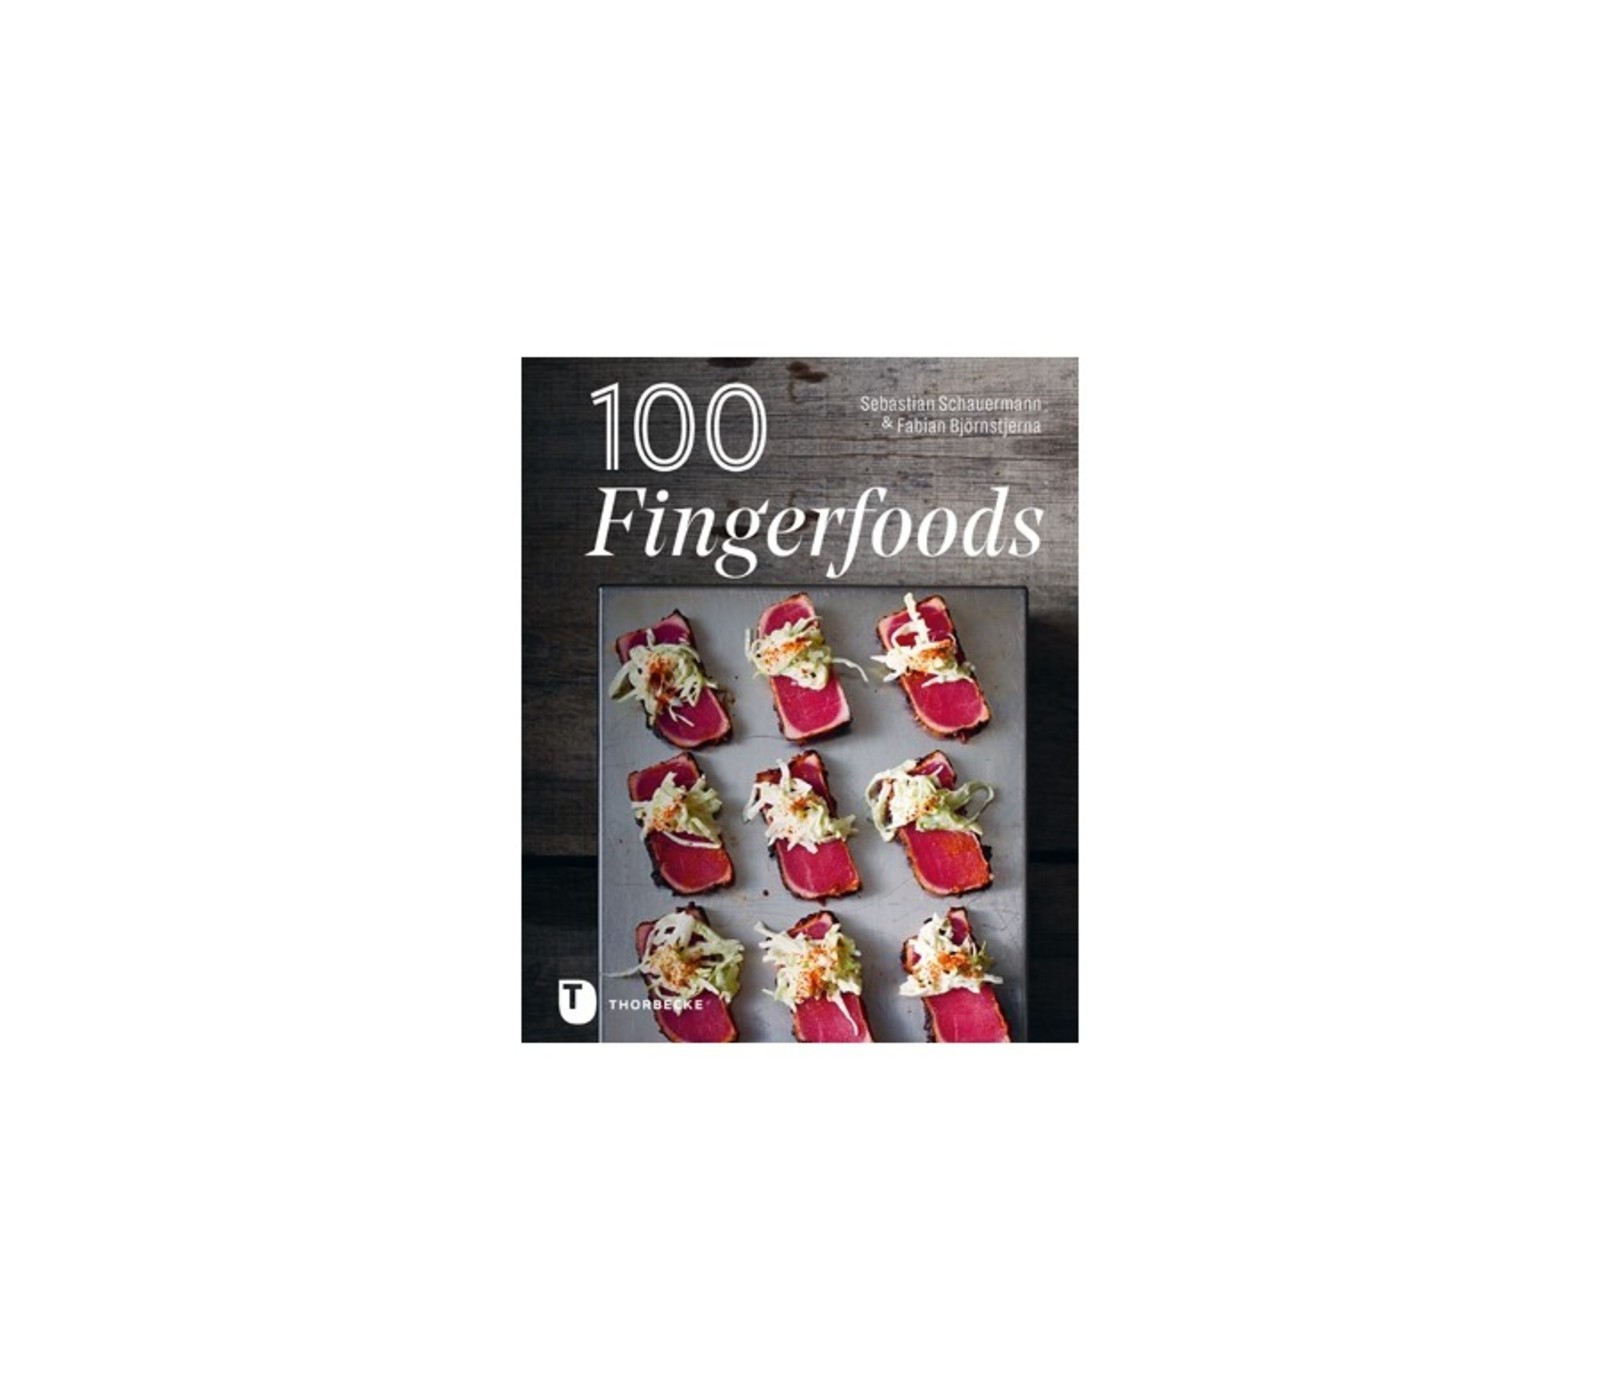 100 Fingerfoods